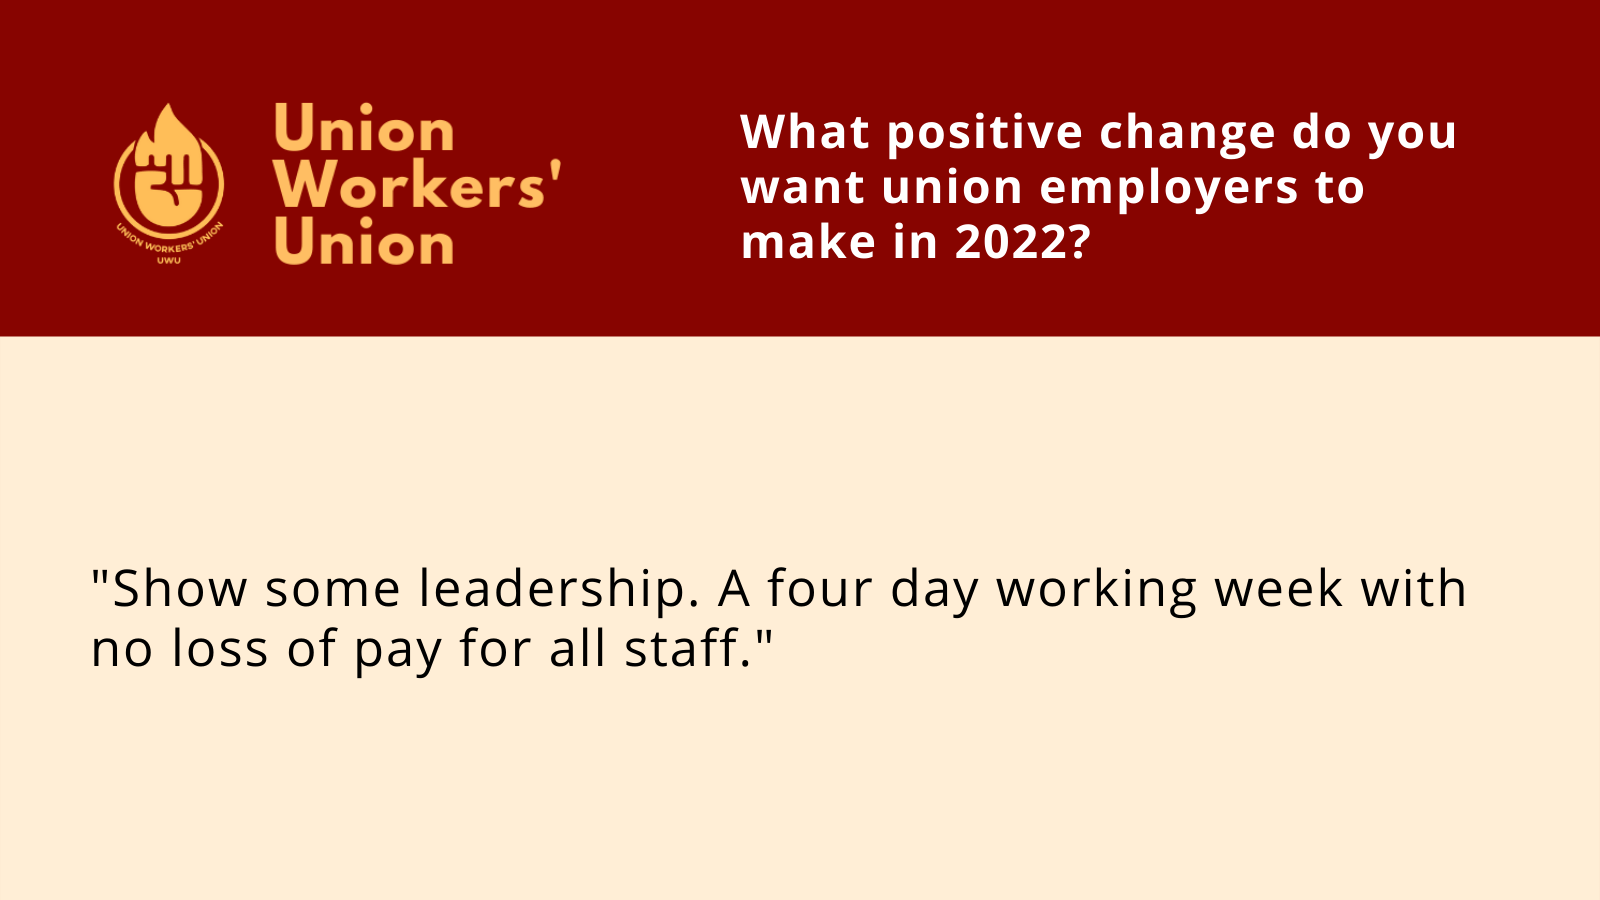 UWU logo with question, what positive change do you want union employers to make in 2022? Member response: Show some leadership. A four day working week with no loss of pay for all staff.